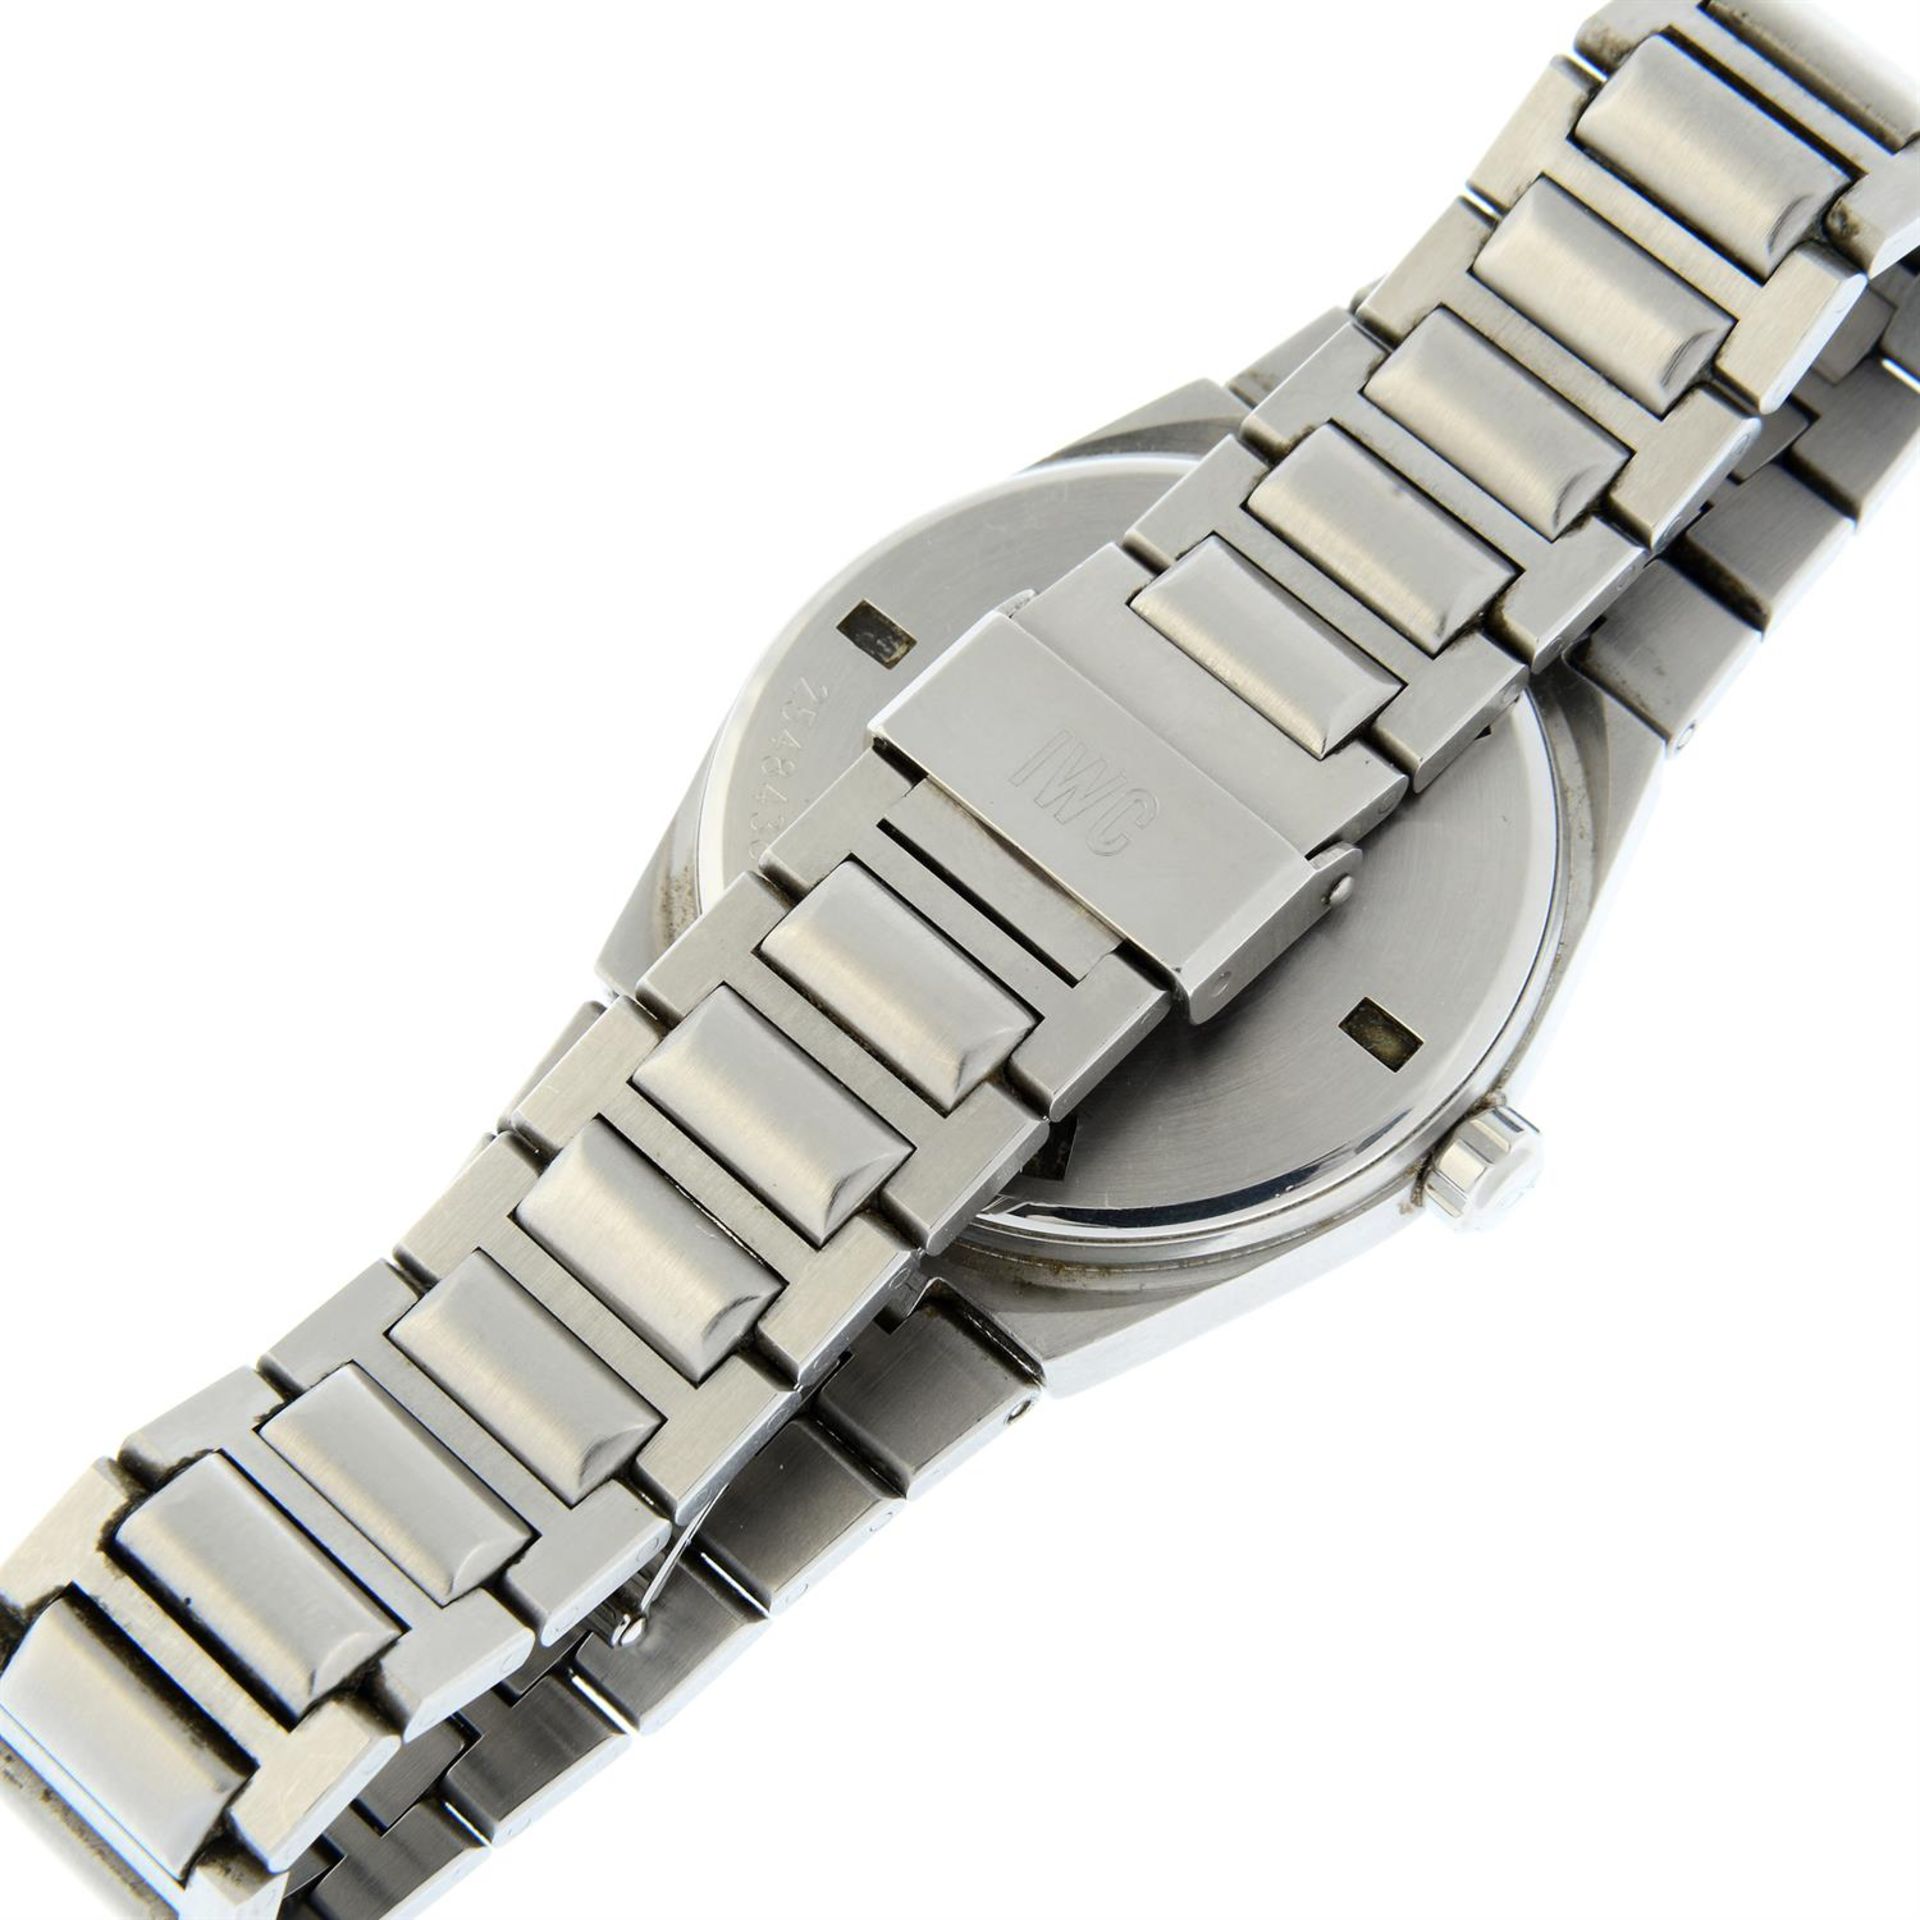 IWC - a stainless steel Ingenieur bracelet watch, 34mm. - Image 2 of 5